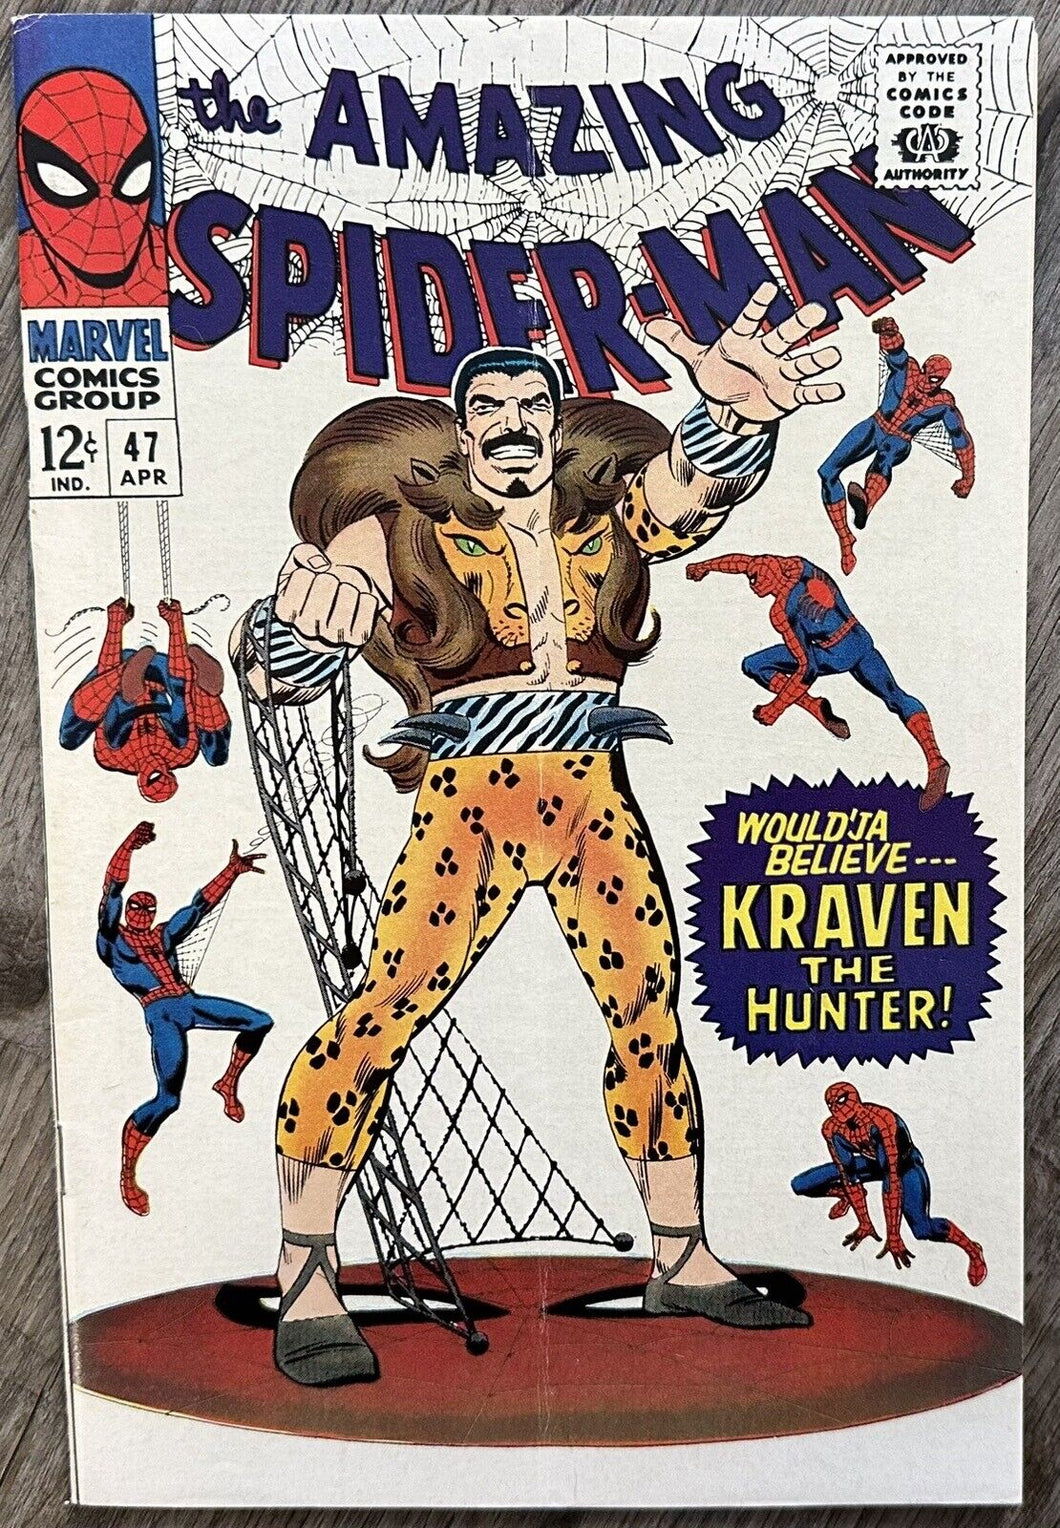 THE AMAZING SPIDER-MAN #47 (MARVEL,1967) Kraven the Hunter appears